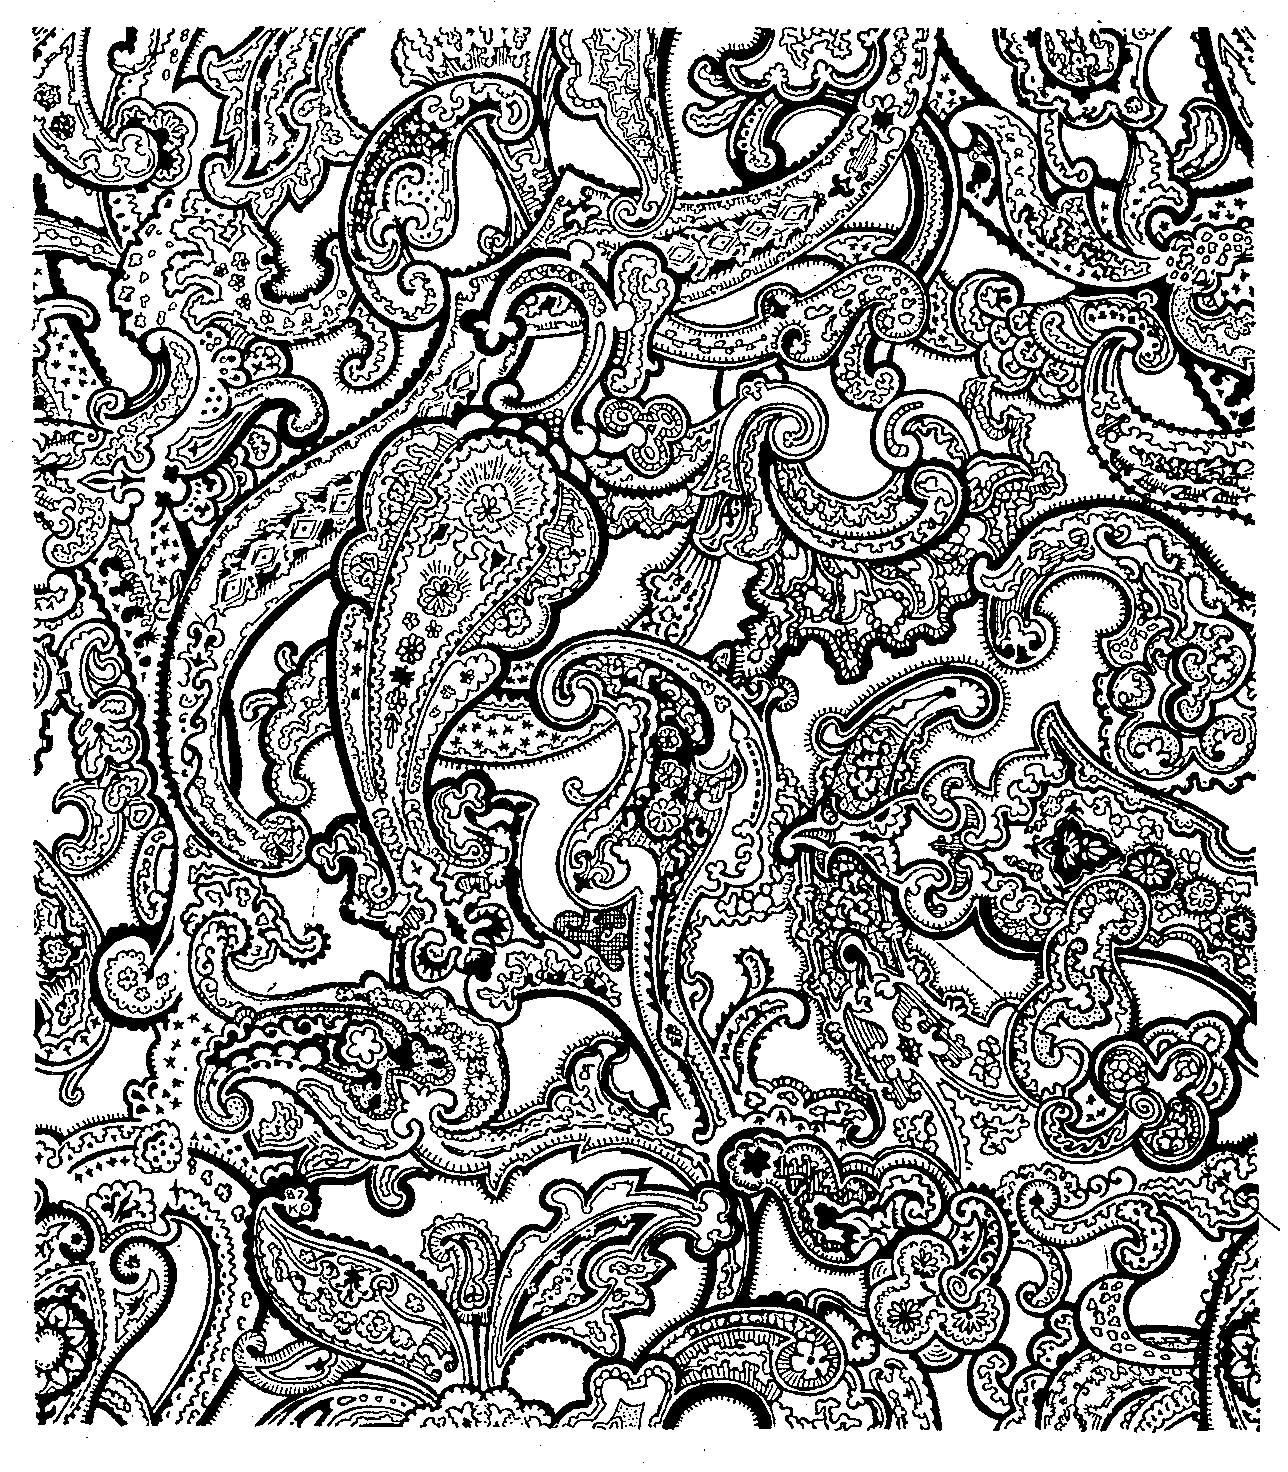 Paisley Pattern Coloring Pages